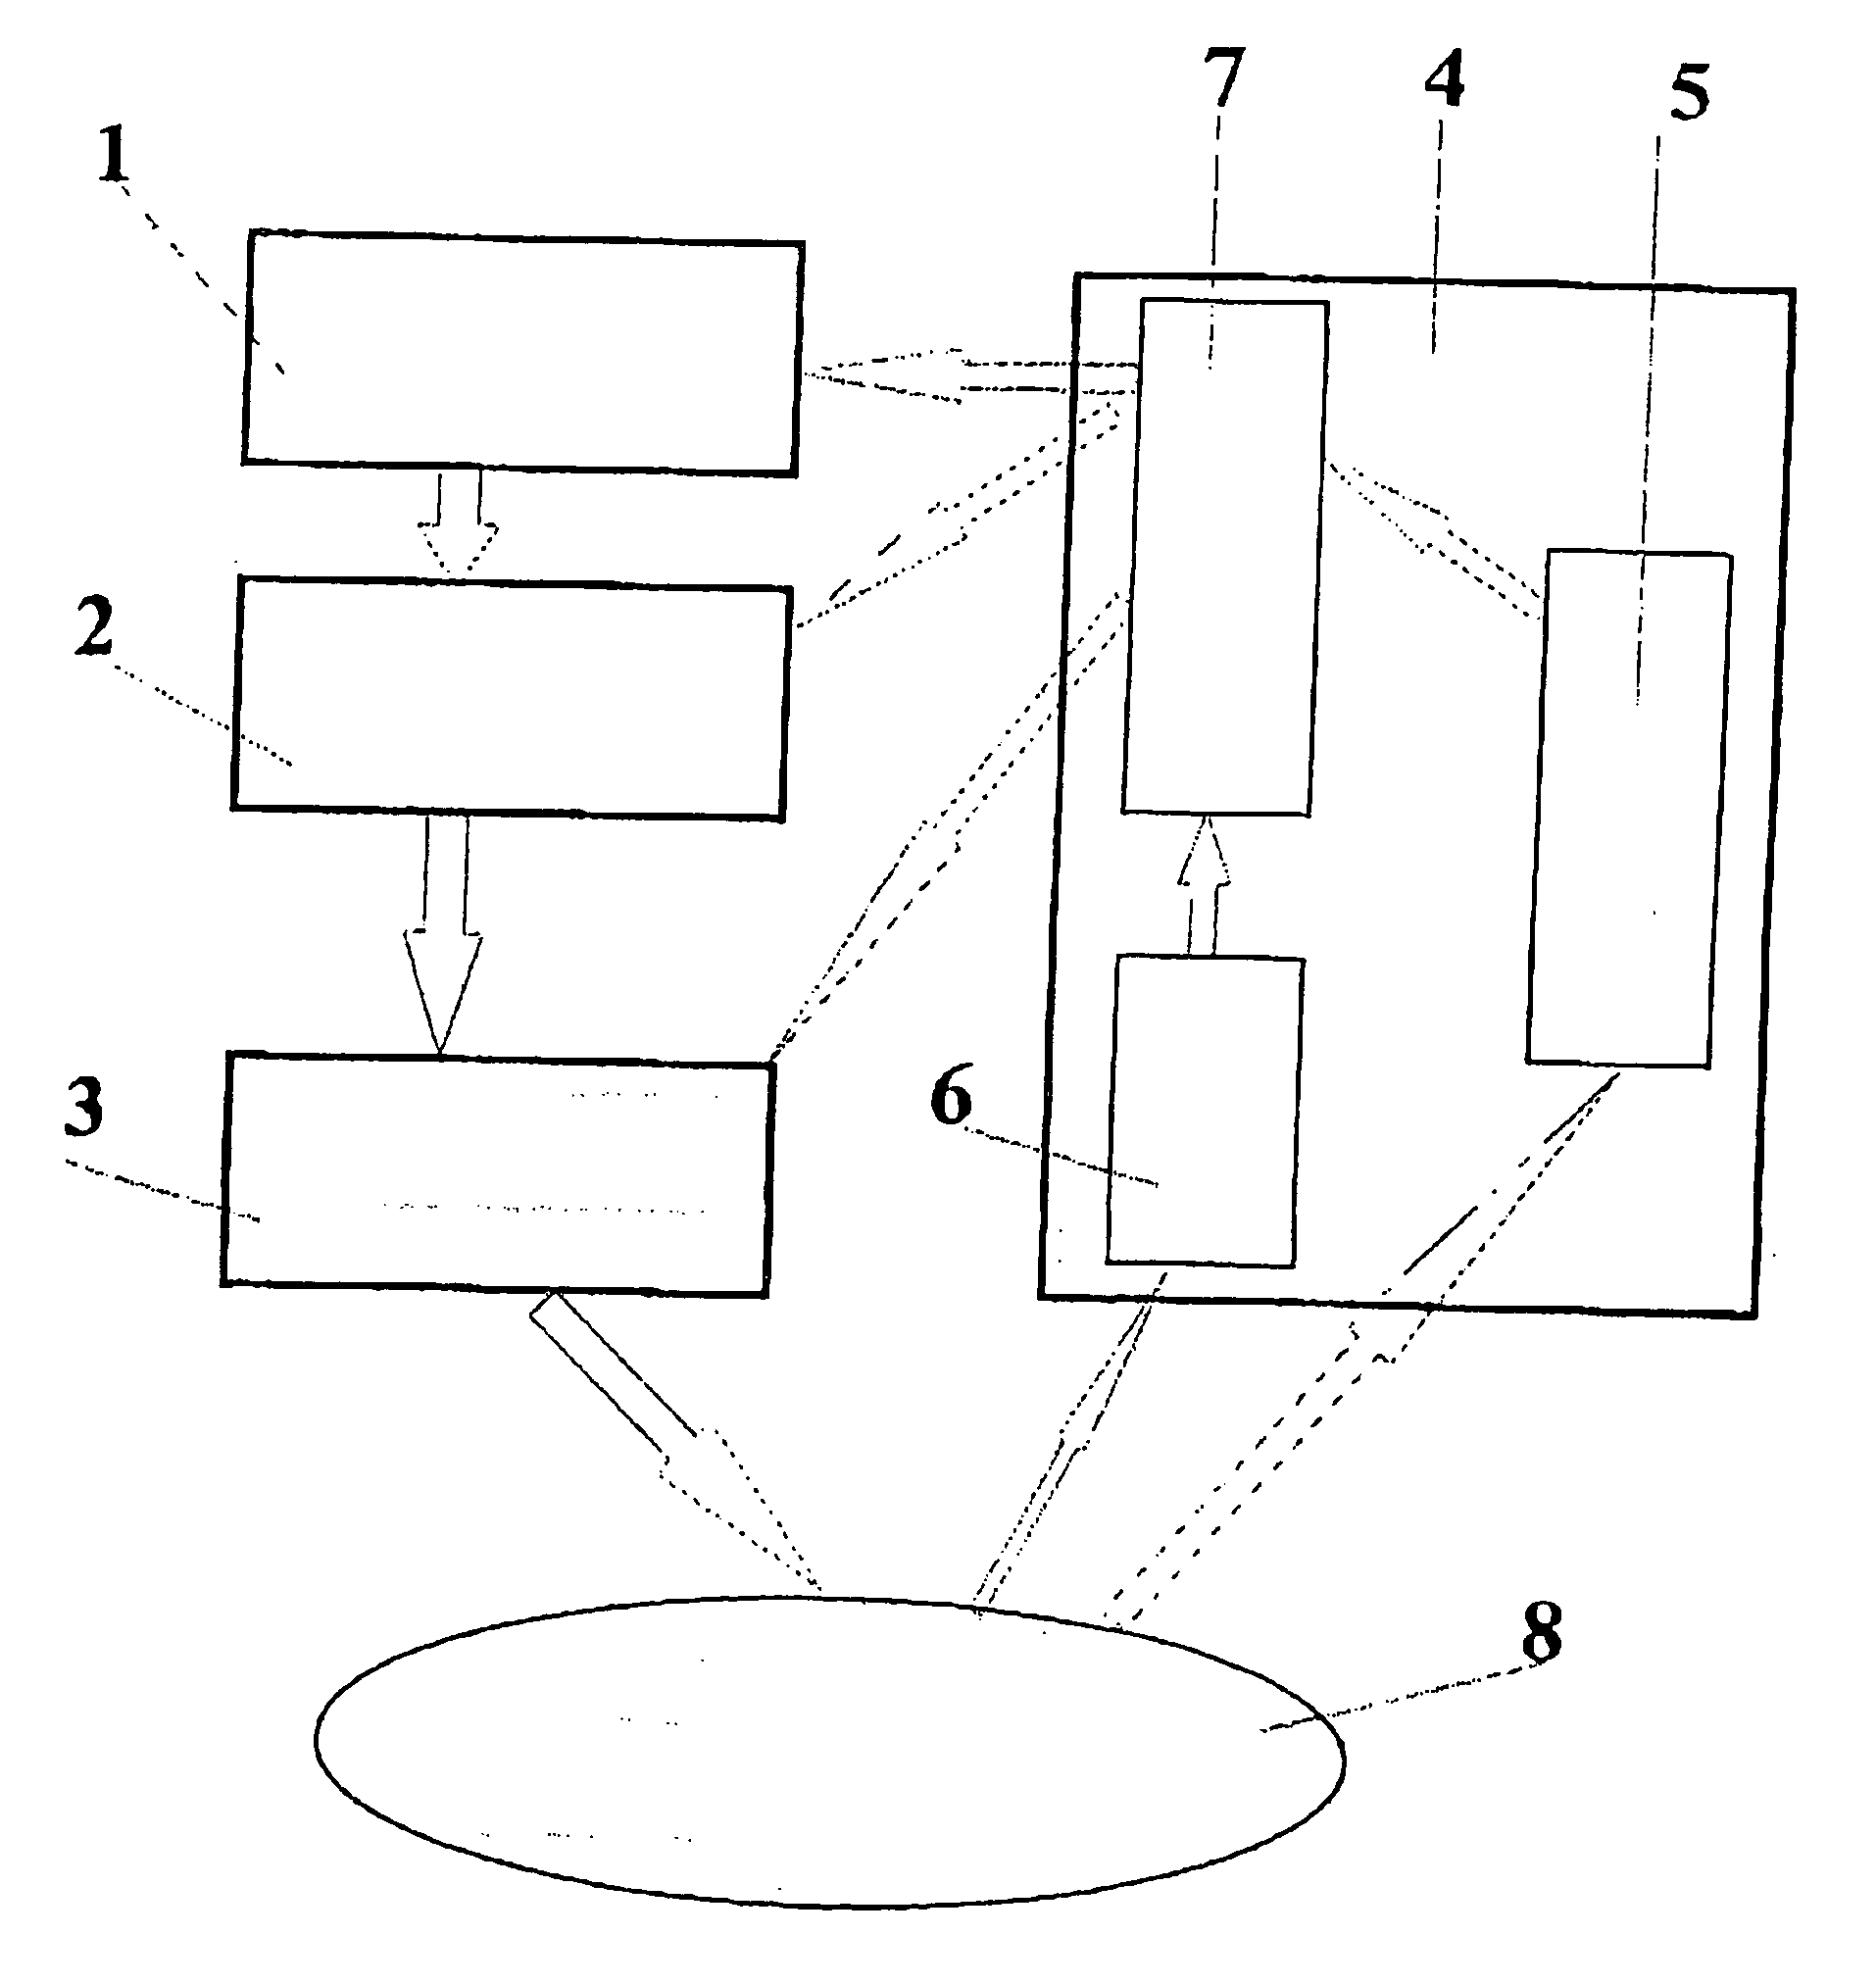 Method and apparatus for opto-thermo-mechanical treatment of biological tissue